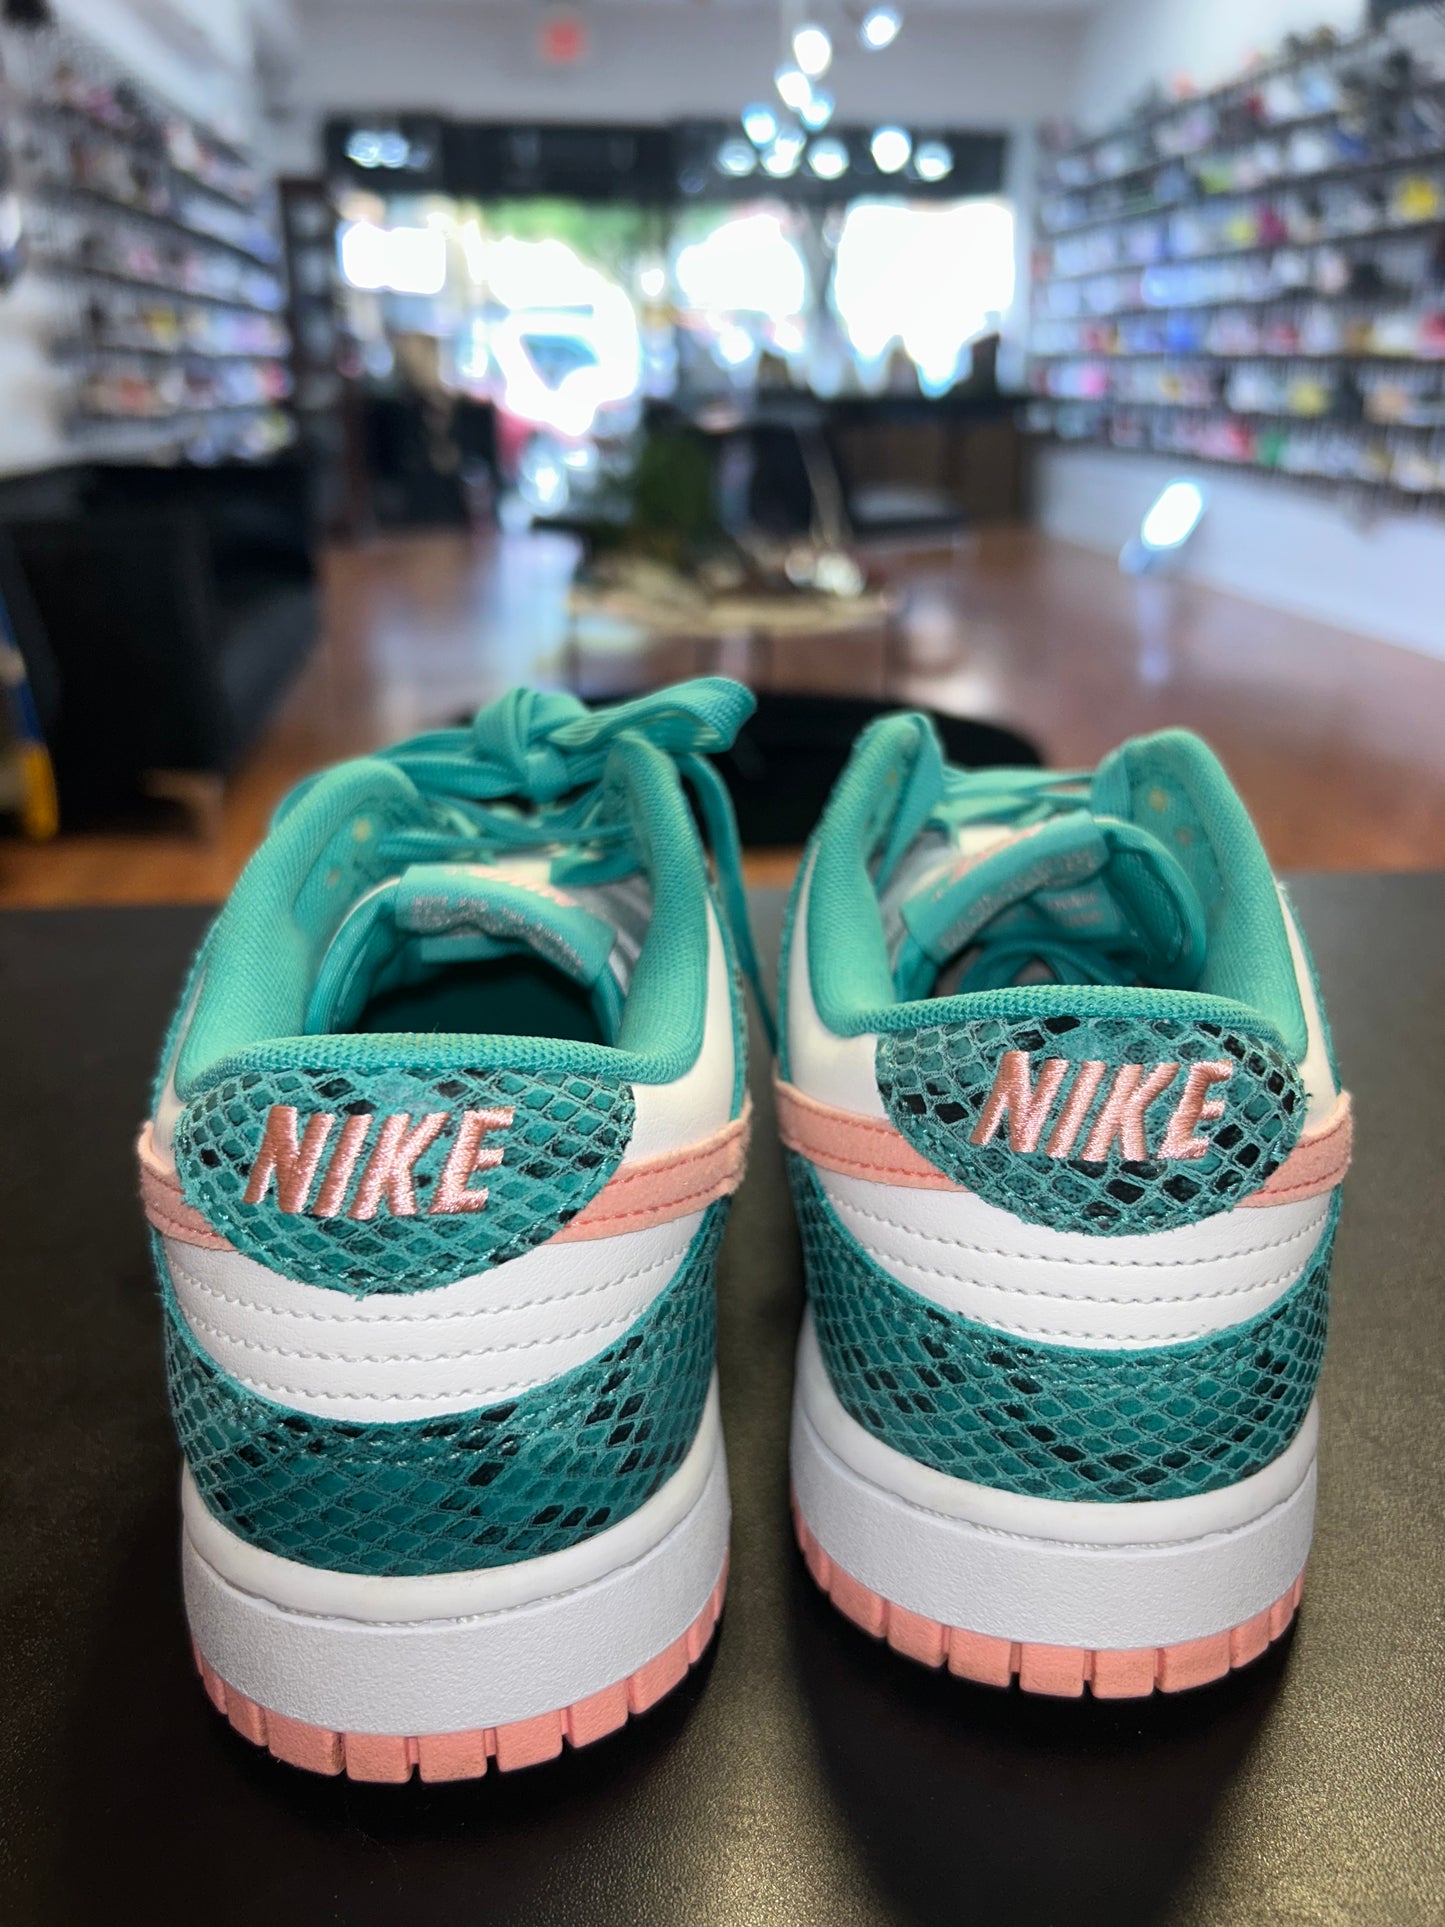 Size 8.5 (10W) Dunk Low “Bleached Coral” Worn 1x (MAMO)